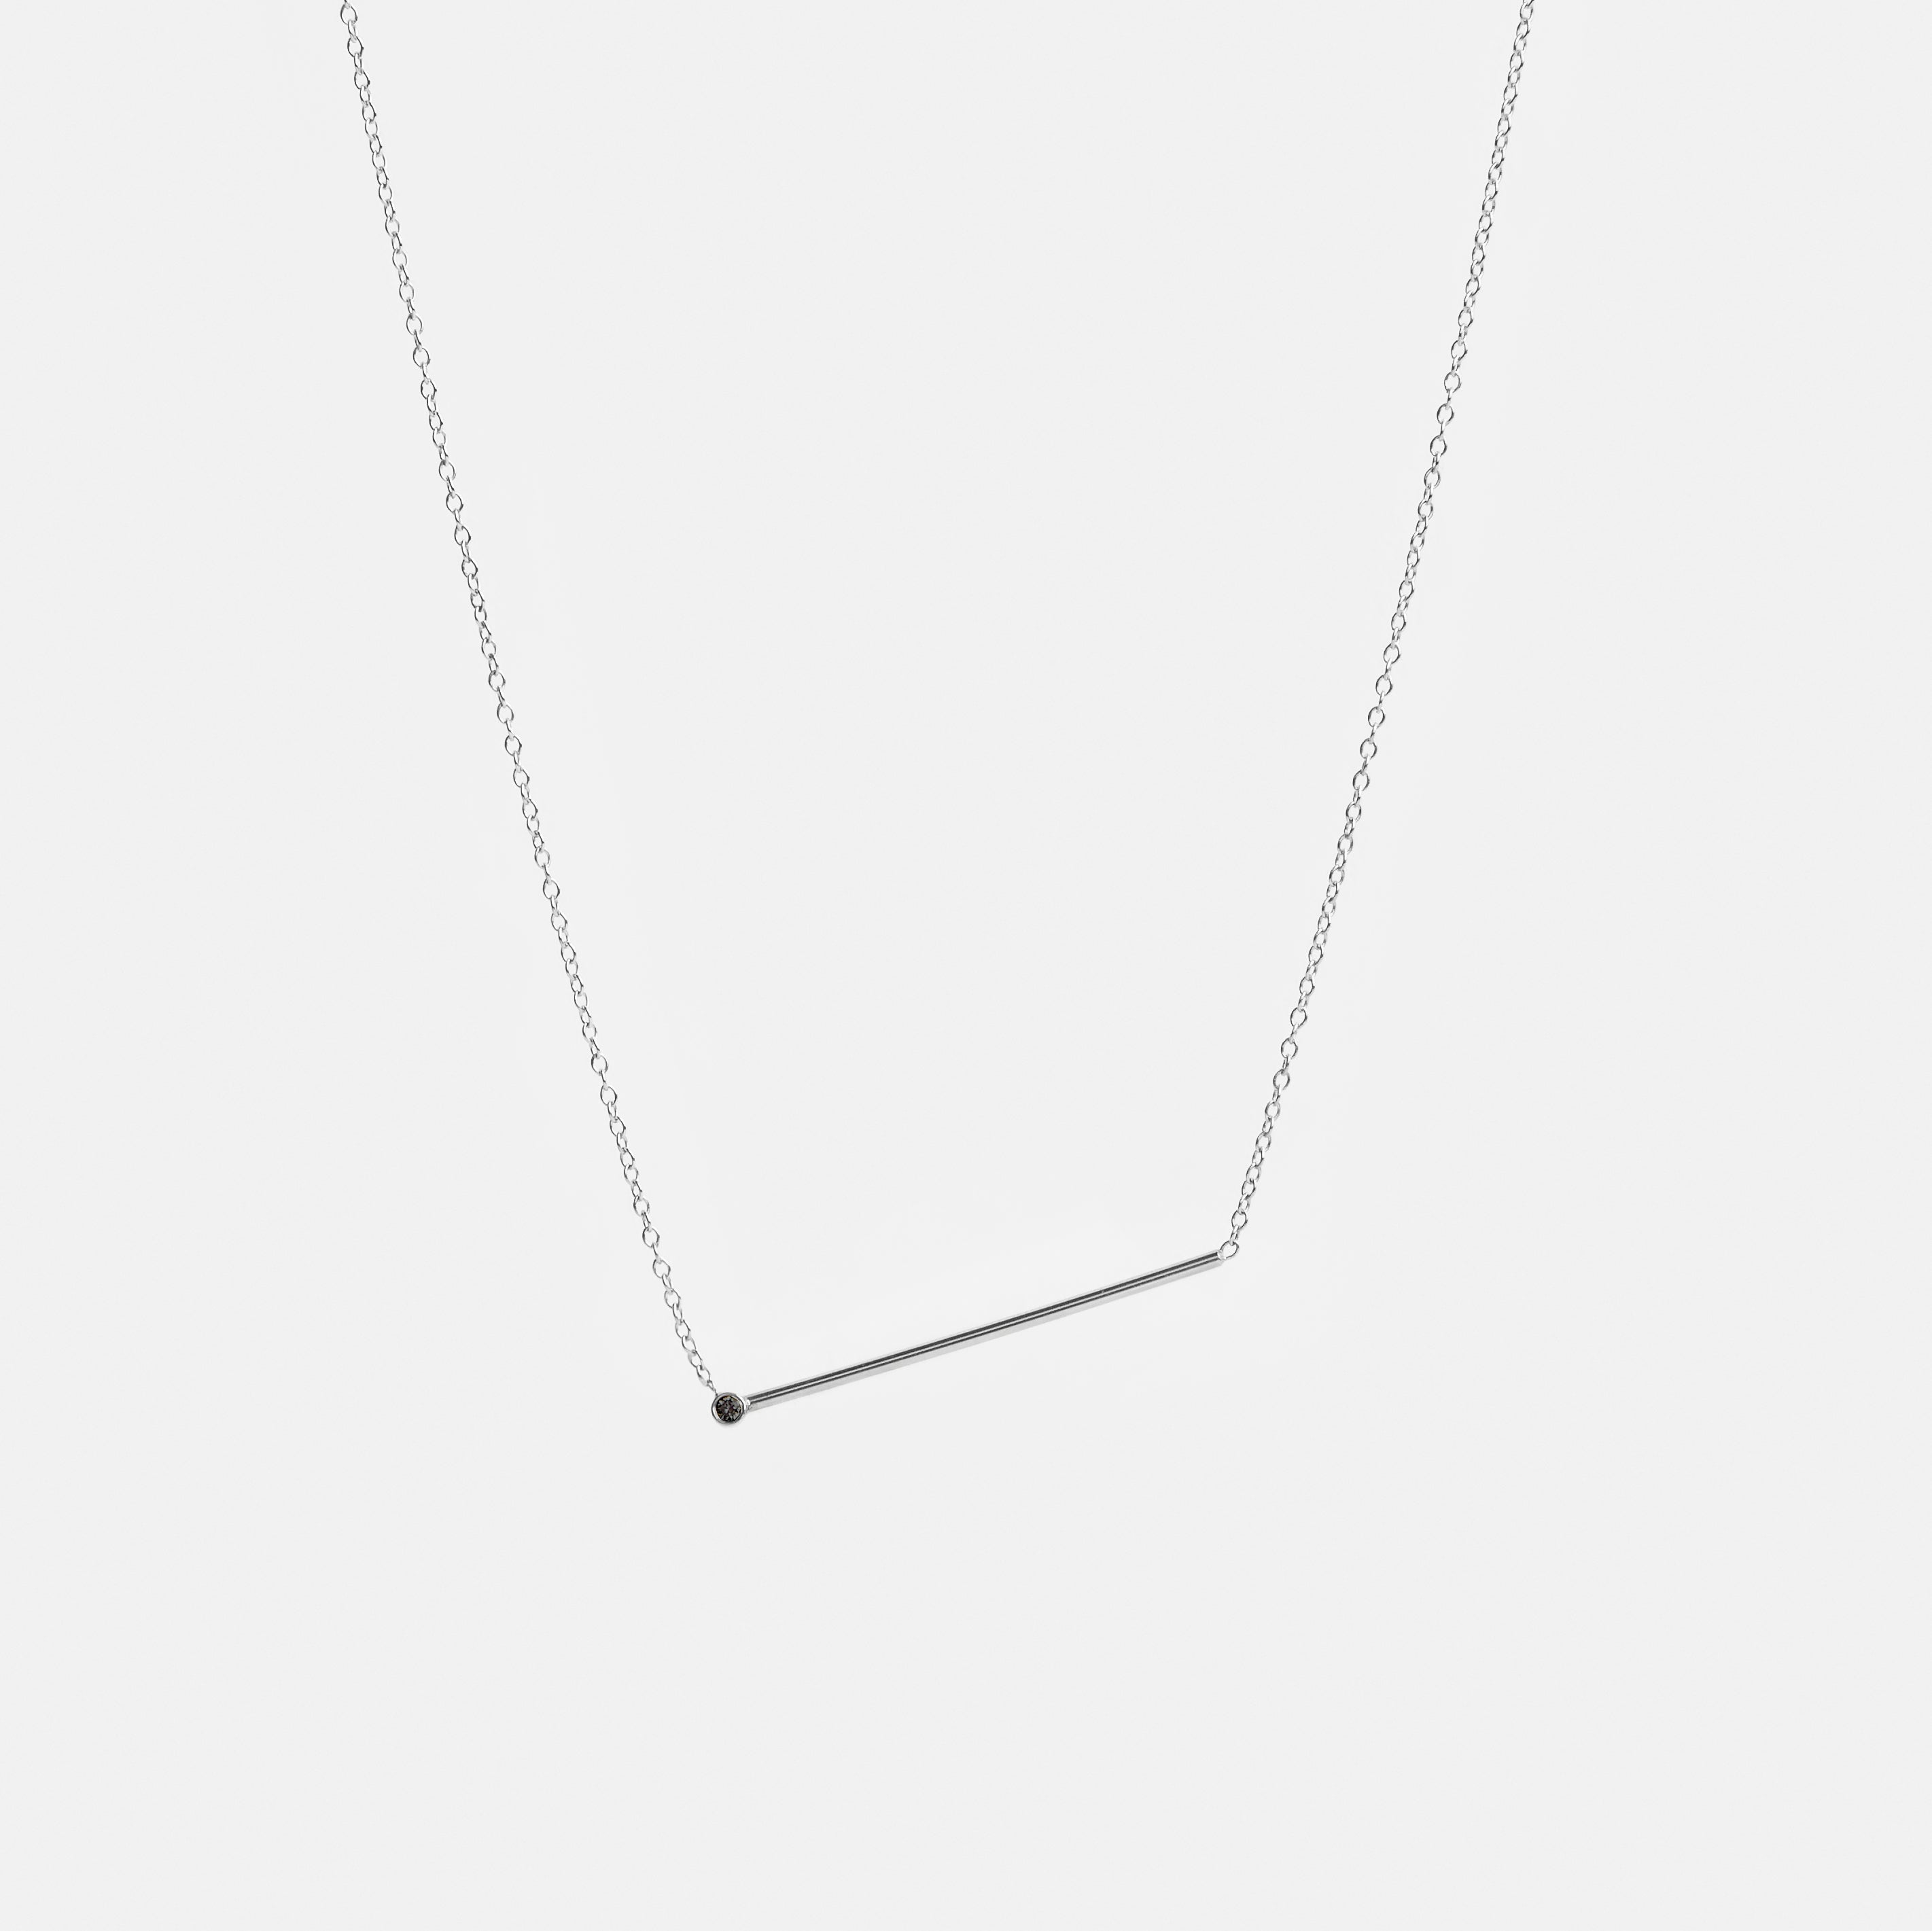 Enne Unique Necklace in 14k White Gold set with Black Diamond By SHW Fine Jewelry NYC